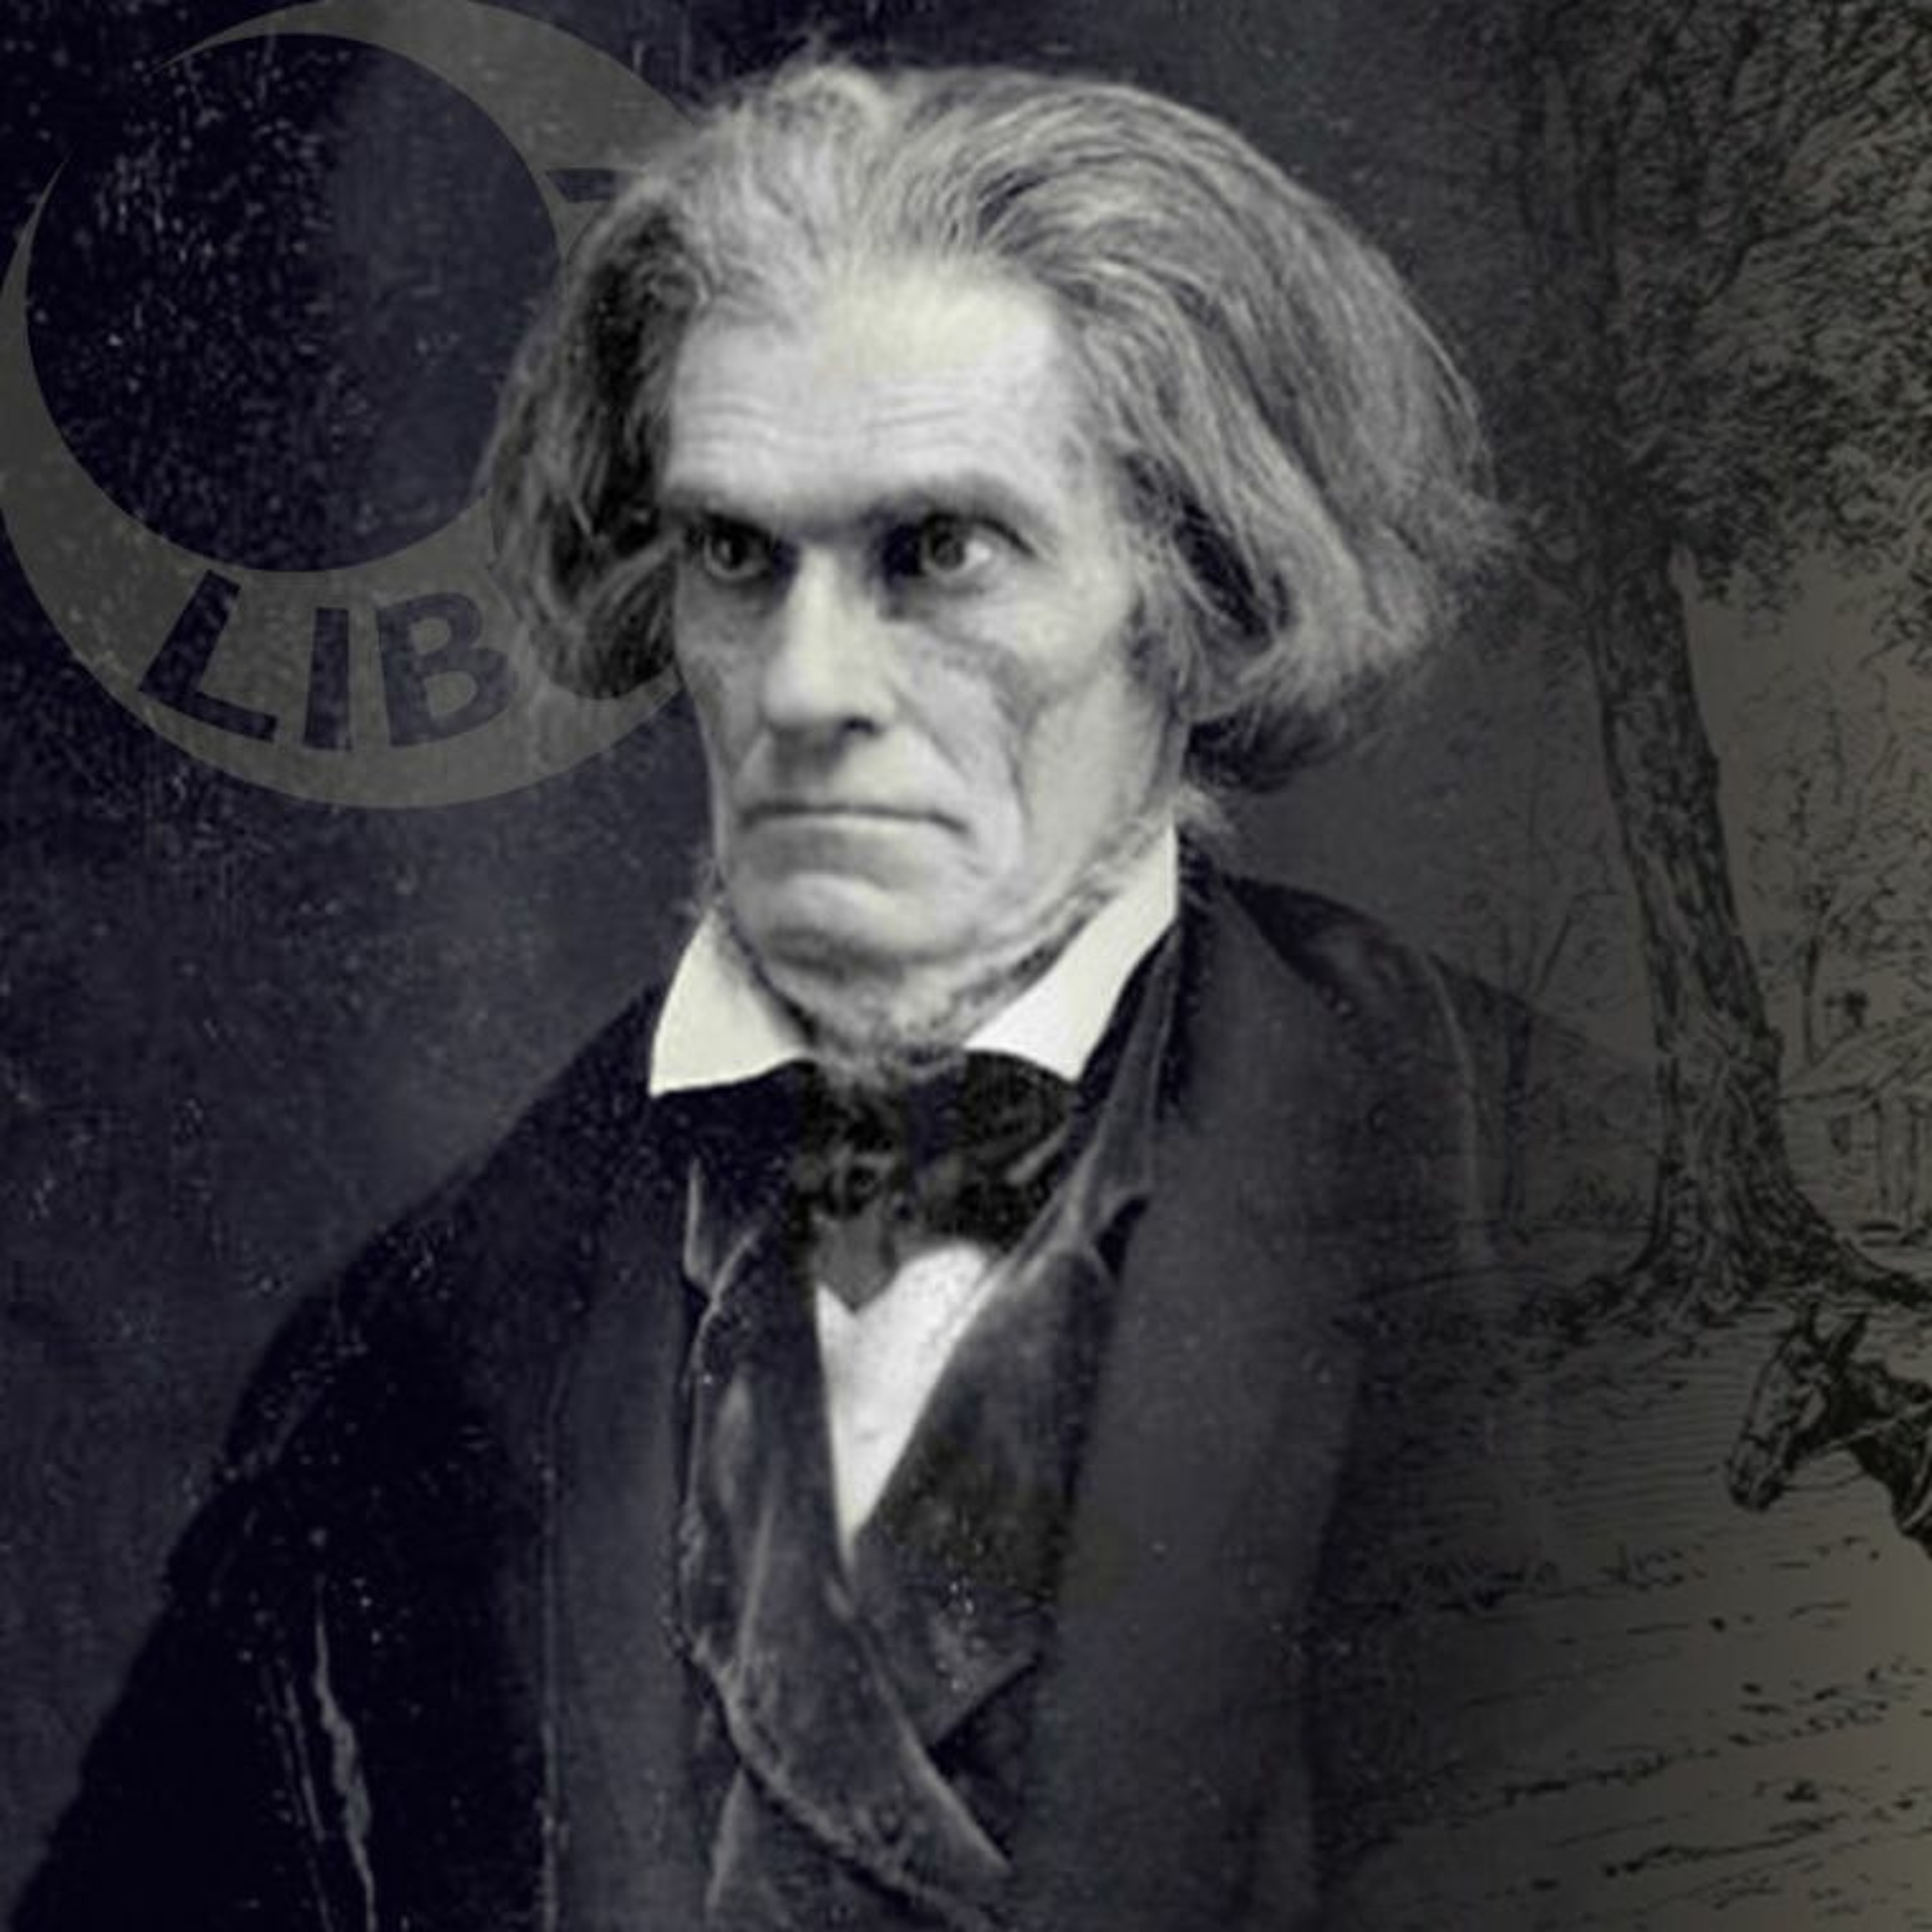 Hillsdale Dialogues 07-23-21: American Heritage: The Tragedy of John C. Calhoun